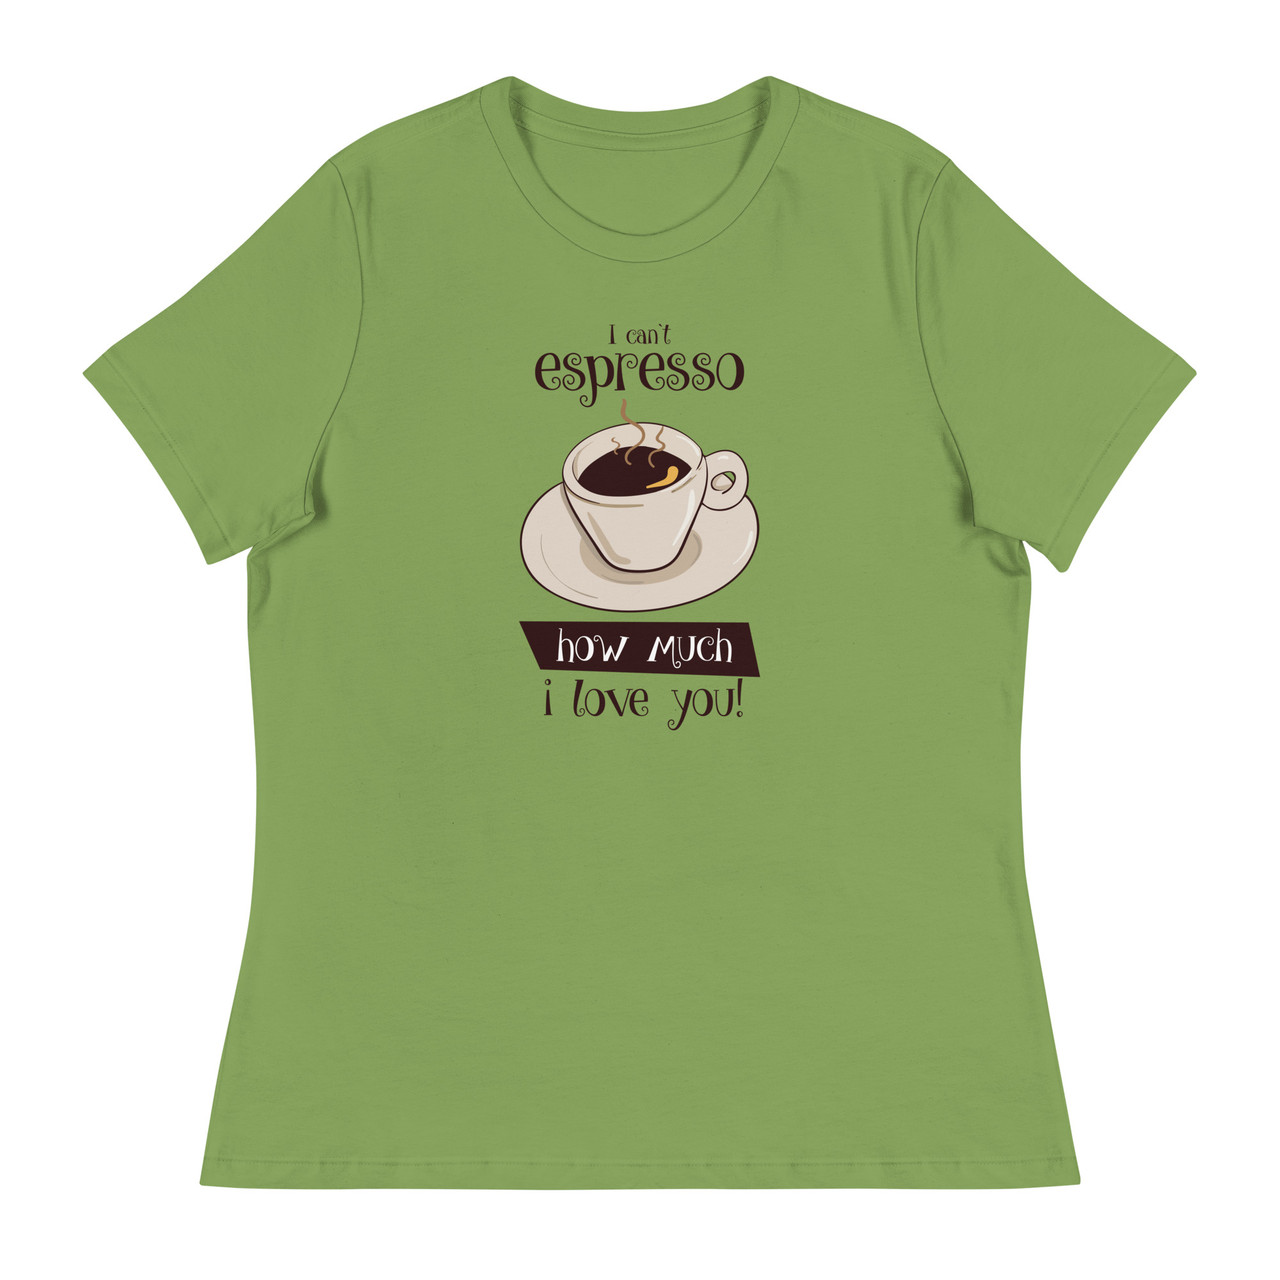 Espresso I love you Women's Relaxed T-Shirt - Bella + Canvas 6400 